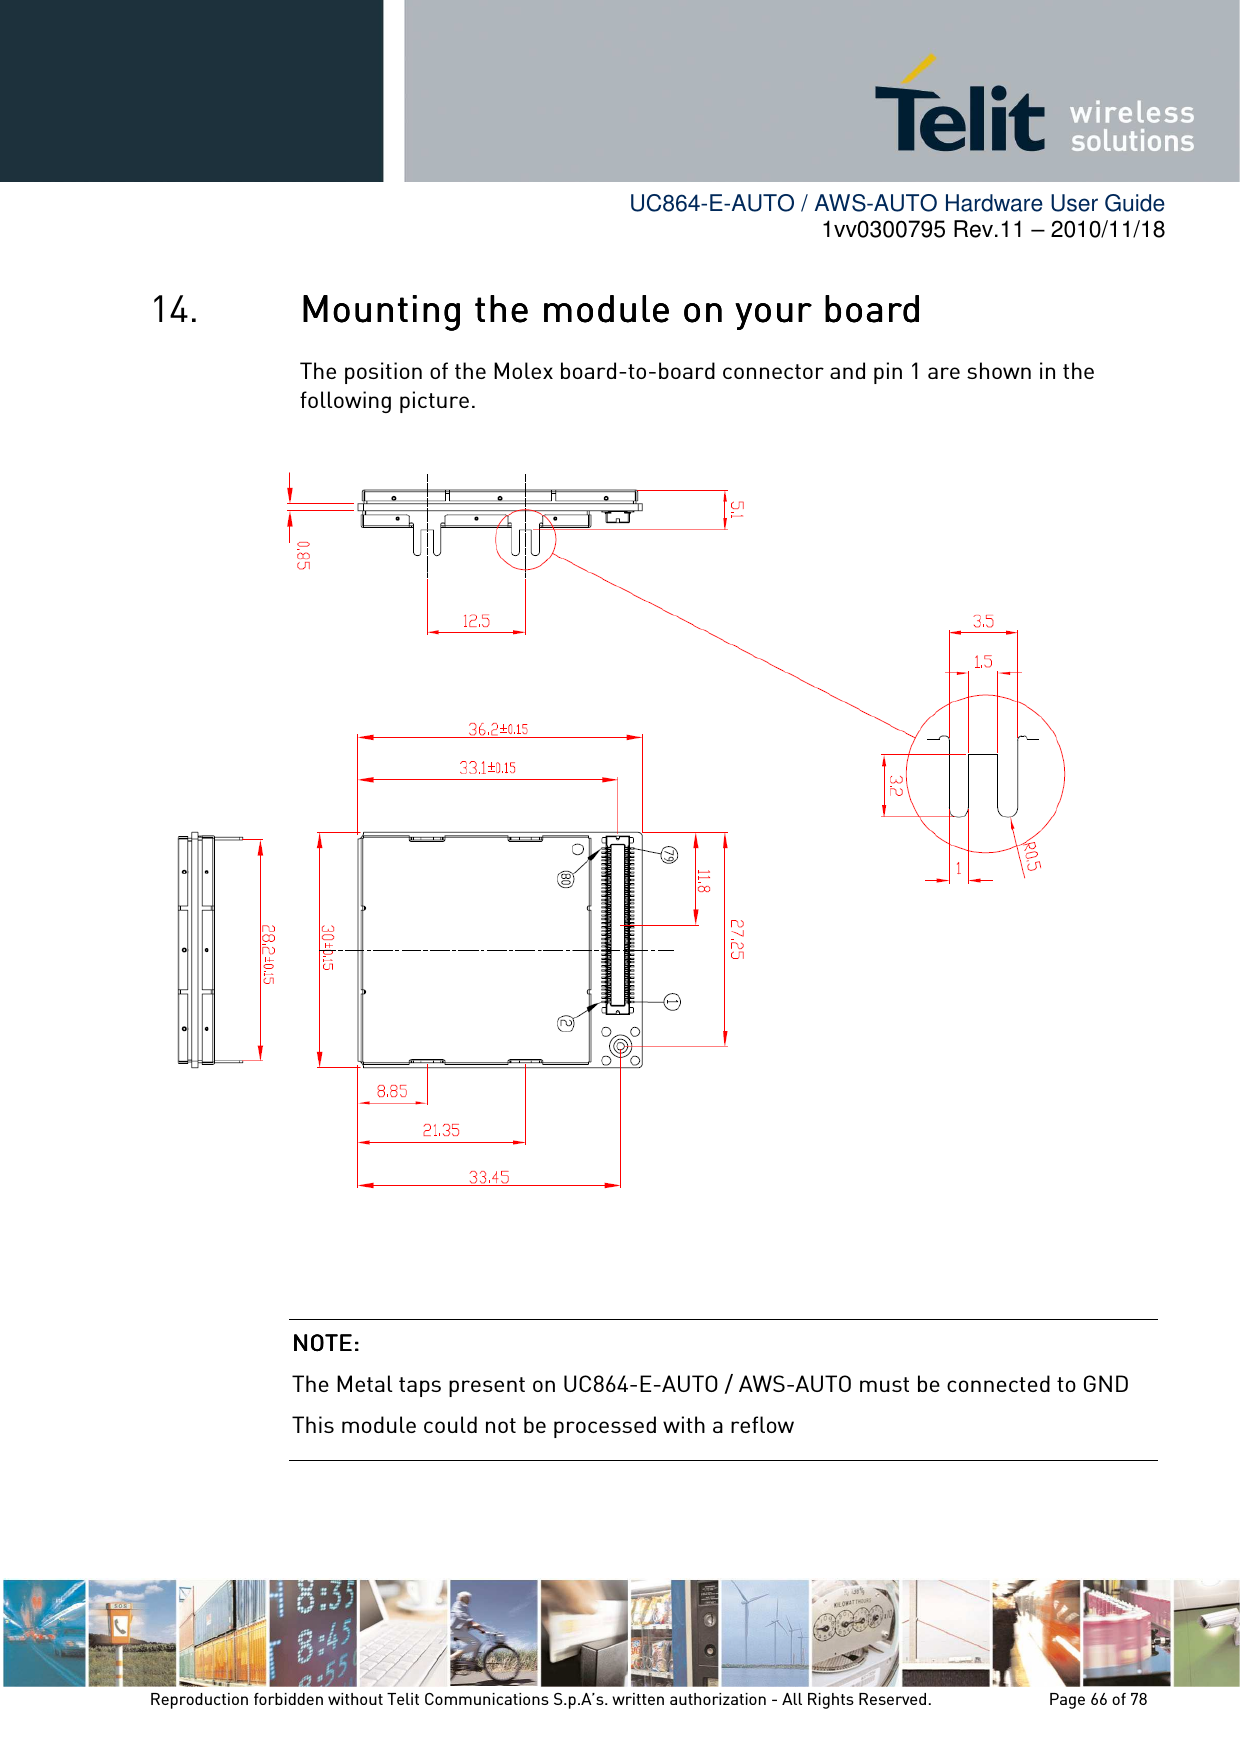        UC864-E-AUTO / AWS-AUTO Hardware User Guide 1vv0300795 Rev.11 – 2010/11/18     Reproduction forbidden without Telit Communications S.p.A’s. written authorization - All Rights Reserved.    Page 66 of 78  14. Mounting the module on your boardMounting the module on your boardMounting the module on your boardMounting the module on your board    The position of the Molex board-to-board connector and pin 1 are shown in the following picture.                      NOTE: NOTE: NOTE: NOTE:     The Metal taps present on UC864-E-AUTO / AWS-AUTO must be connected to GND This module could not be processed with a reflow 